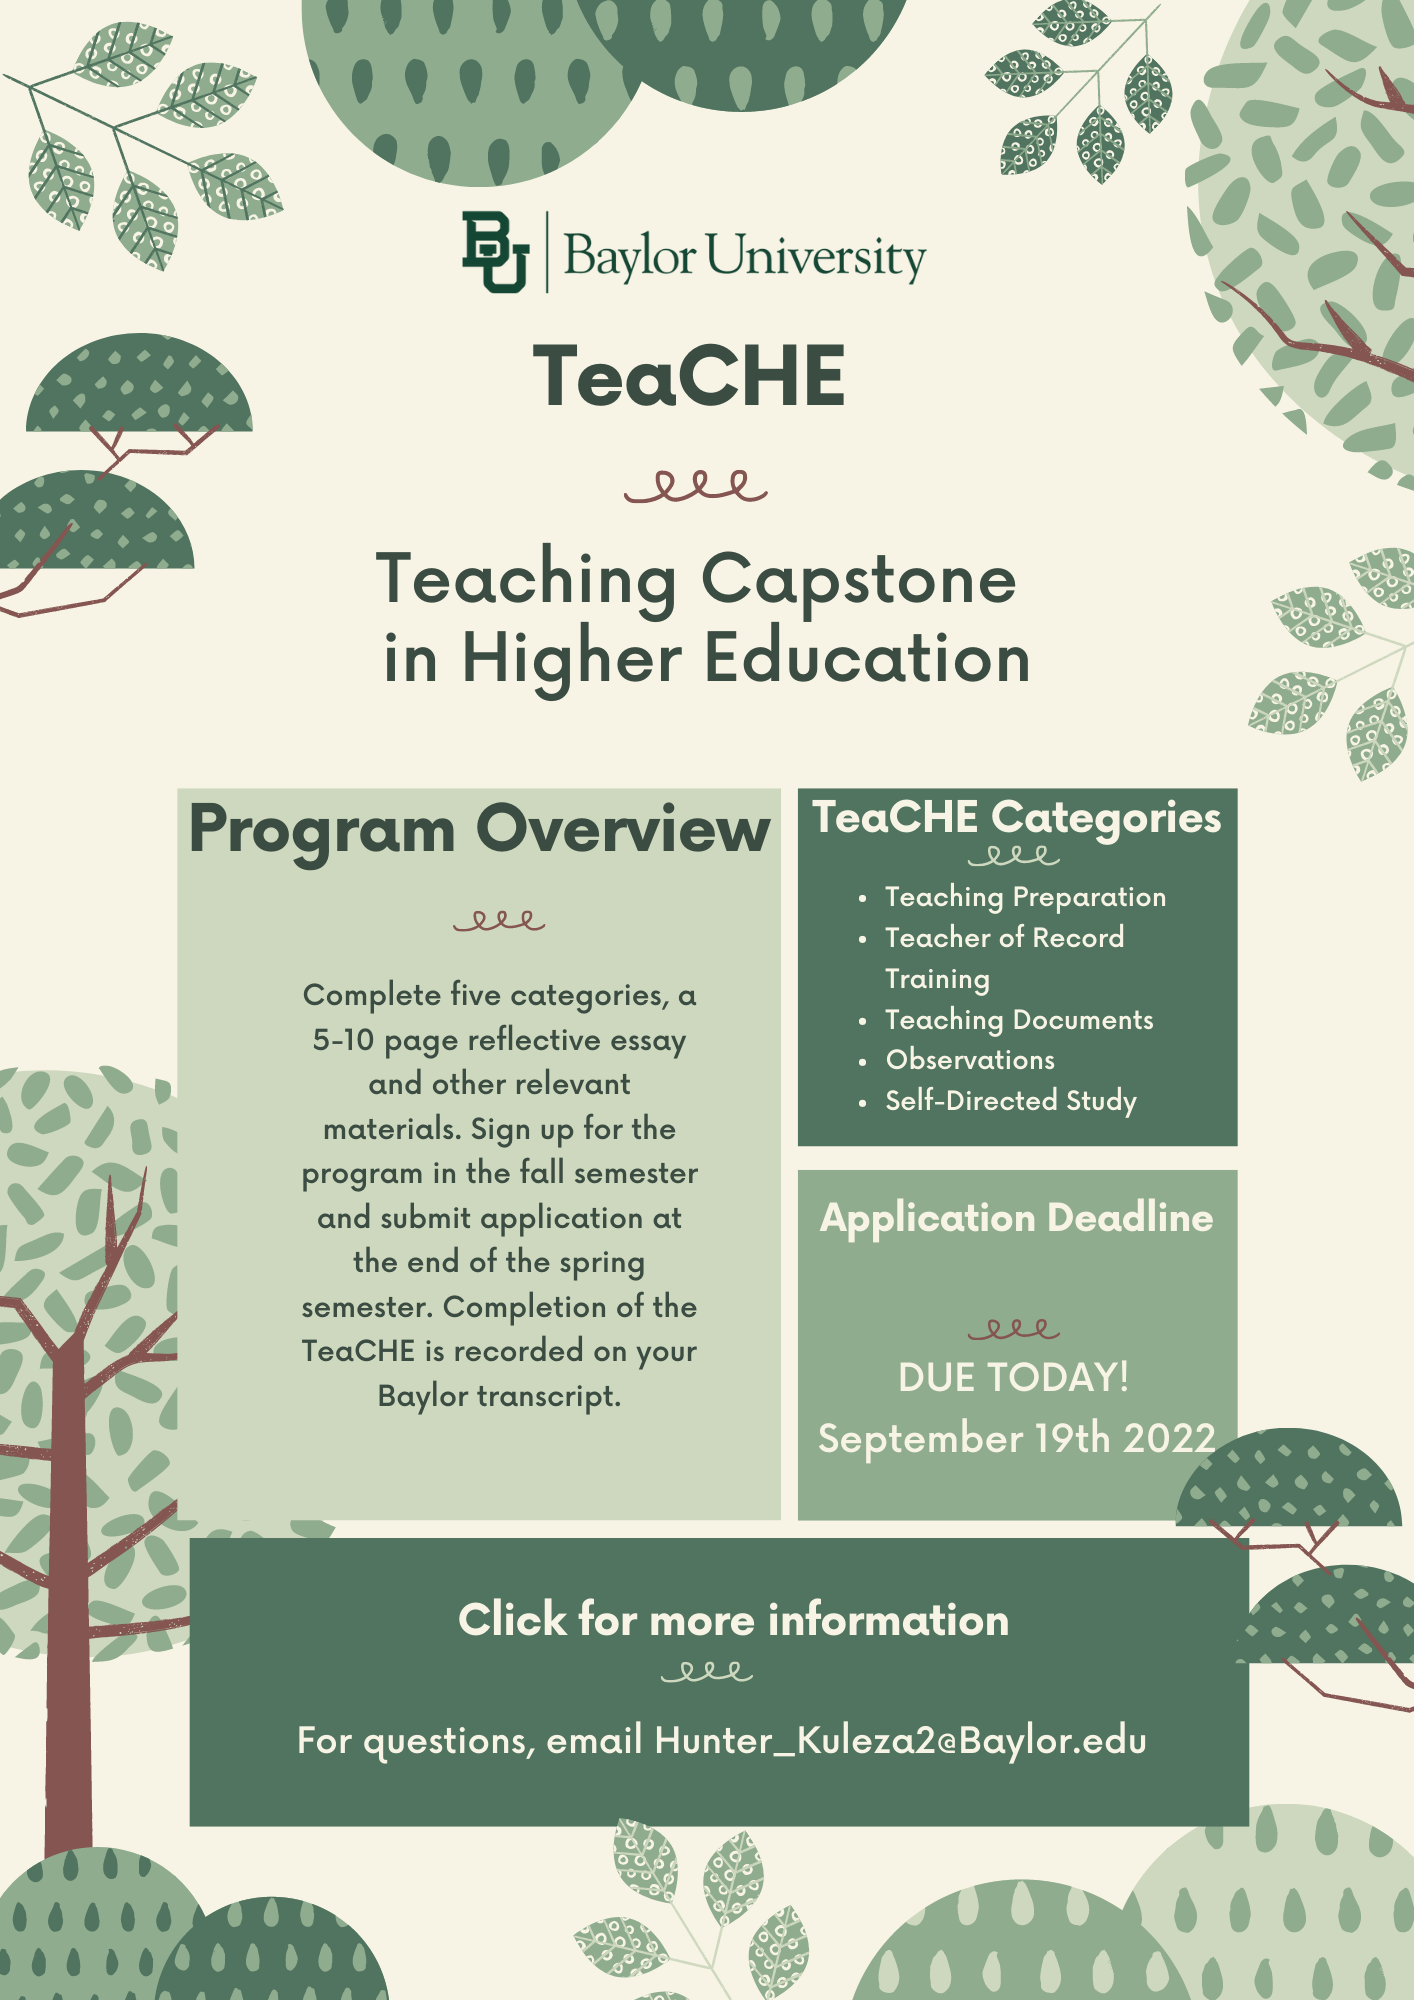 Program Overview TeaCHE consists of five categories of tasks. Each category carries its own requirements and all five must be completed successfully to receive a Teaching Capstone in Higher Education. Upon completion of all five categories, applicants compose a 5-10 page reflective essay and submit it for review along with all other relevant materials. Participants sign up for the program in the fall semester and submit their final application for completion at the end of the spring semester in the same academic year. Successful completion of the Teaching Capstone in Higher Education is recorded on the participant's Baylor transcript.  Teach Categories: Teaching preparation, Teacher of Record Training, Teaching Documents, Observations, Self-Directed Study  Application Deadline is Due Today, September 19th, 2022. Click Image for more information. For questions, email hunter_Kuleza2@Baylor.edu